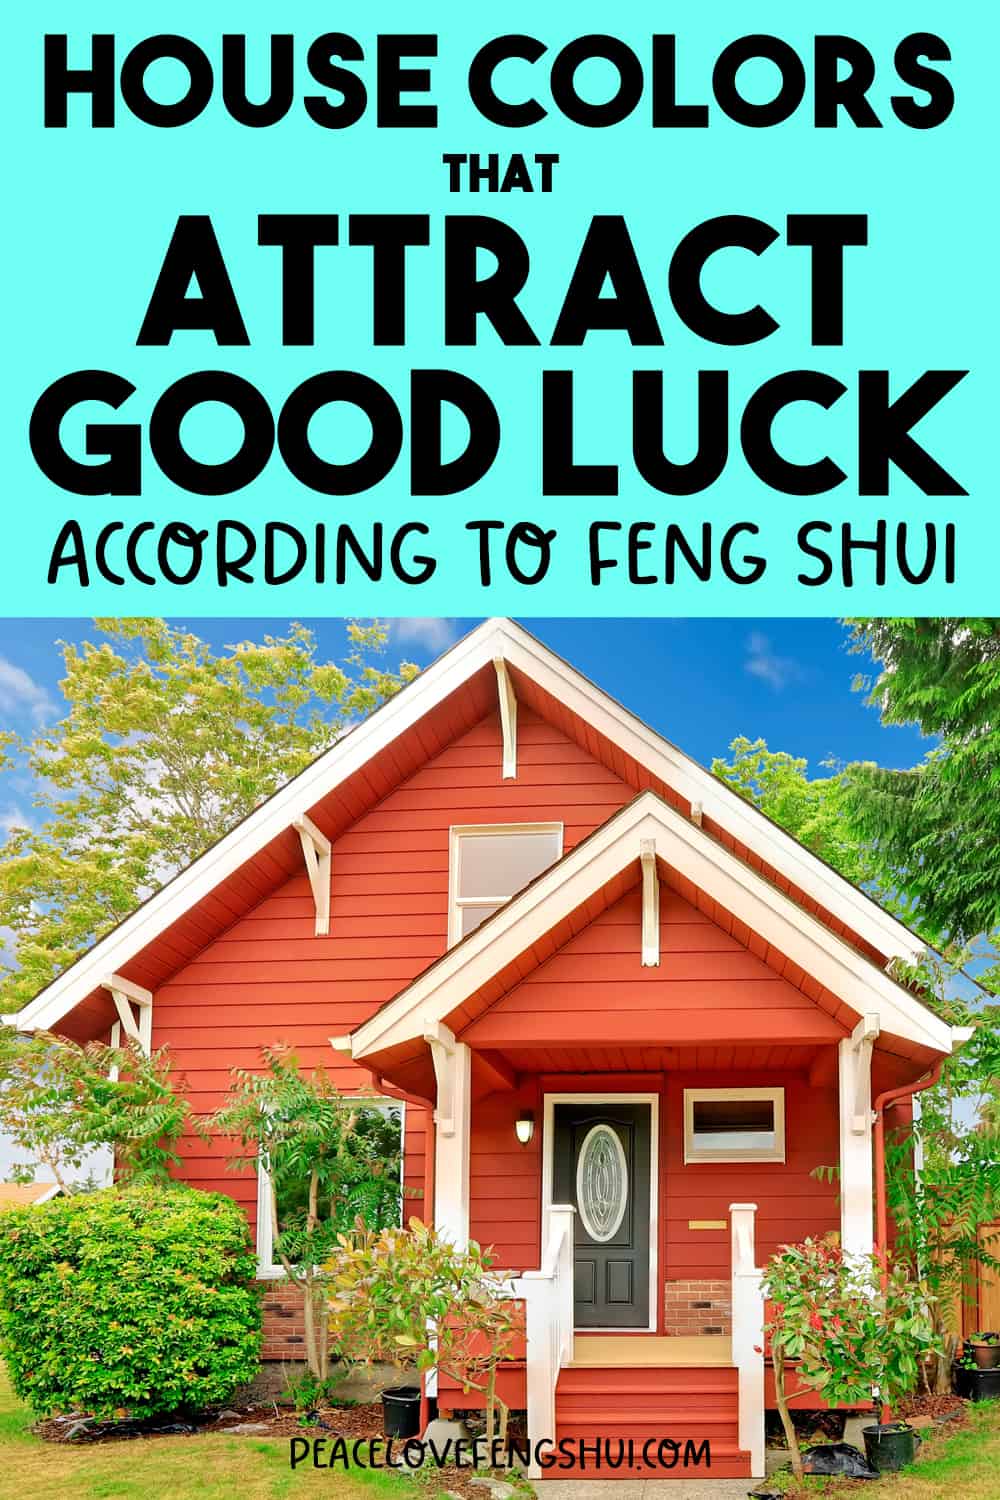 house colors that attract good luck according to feng shui